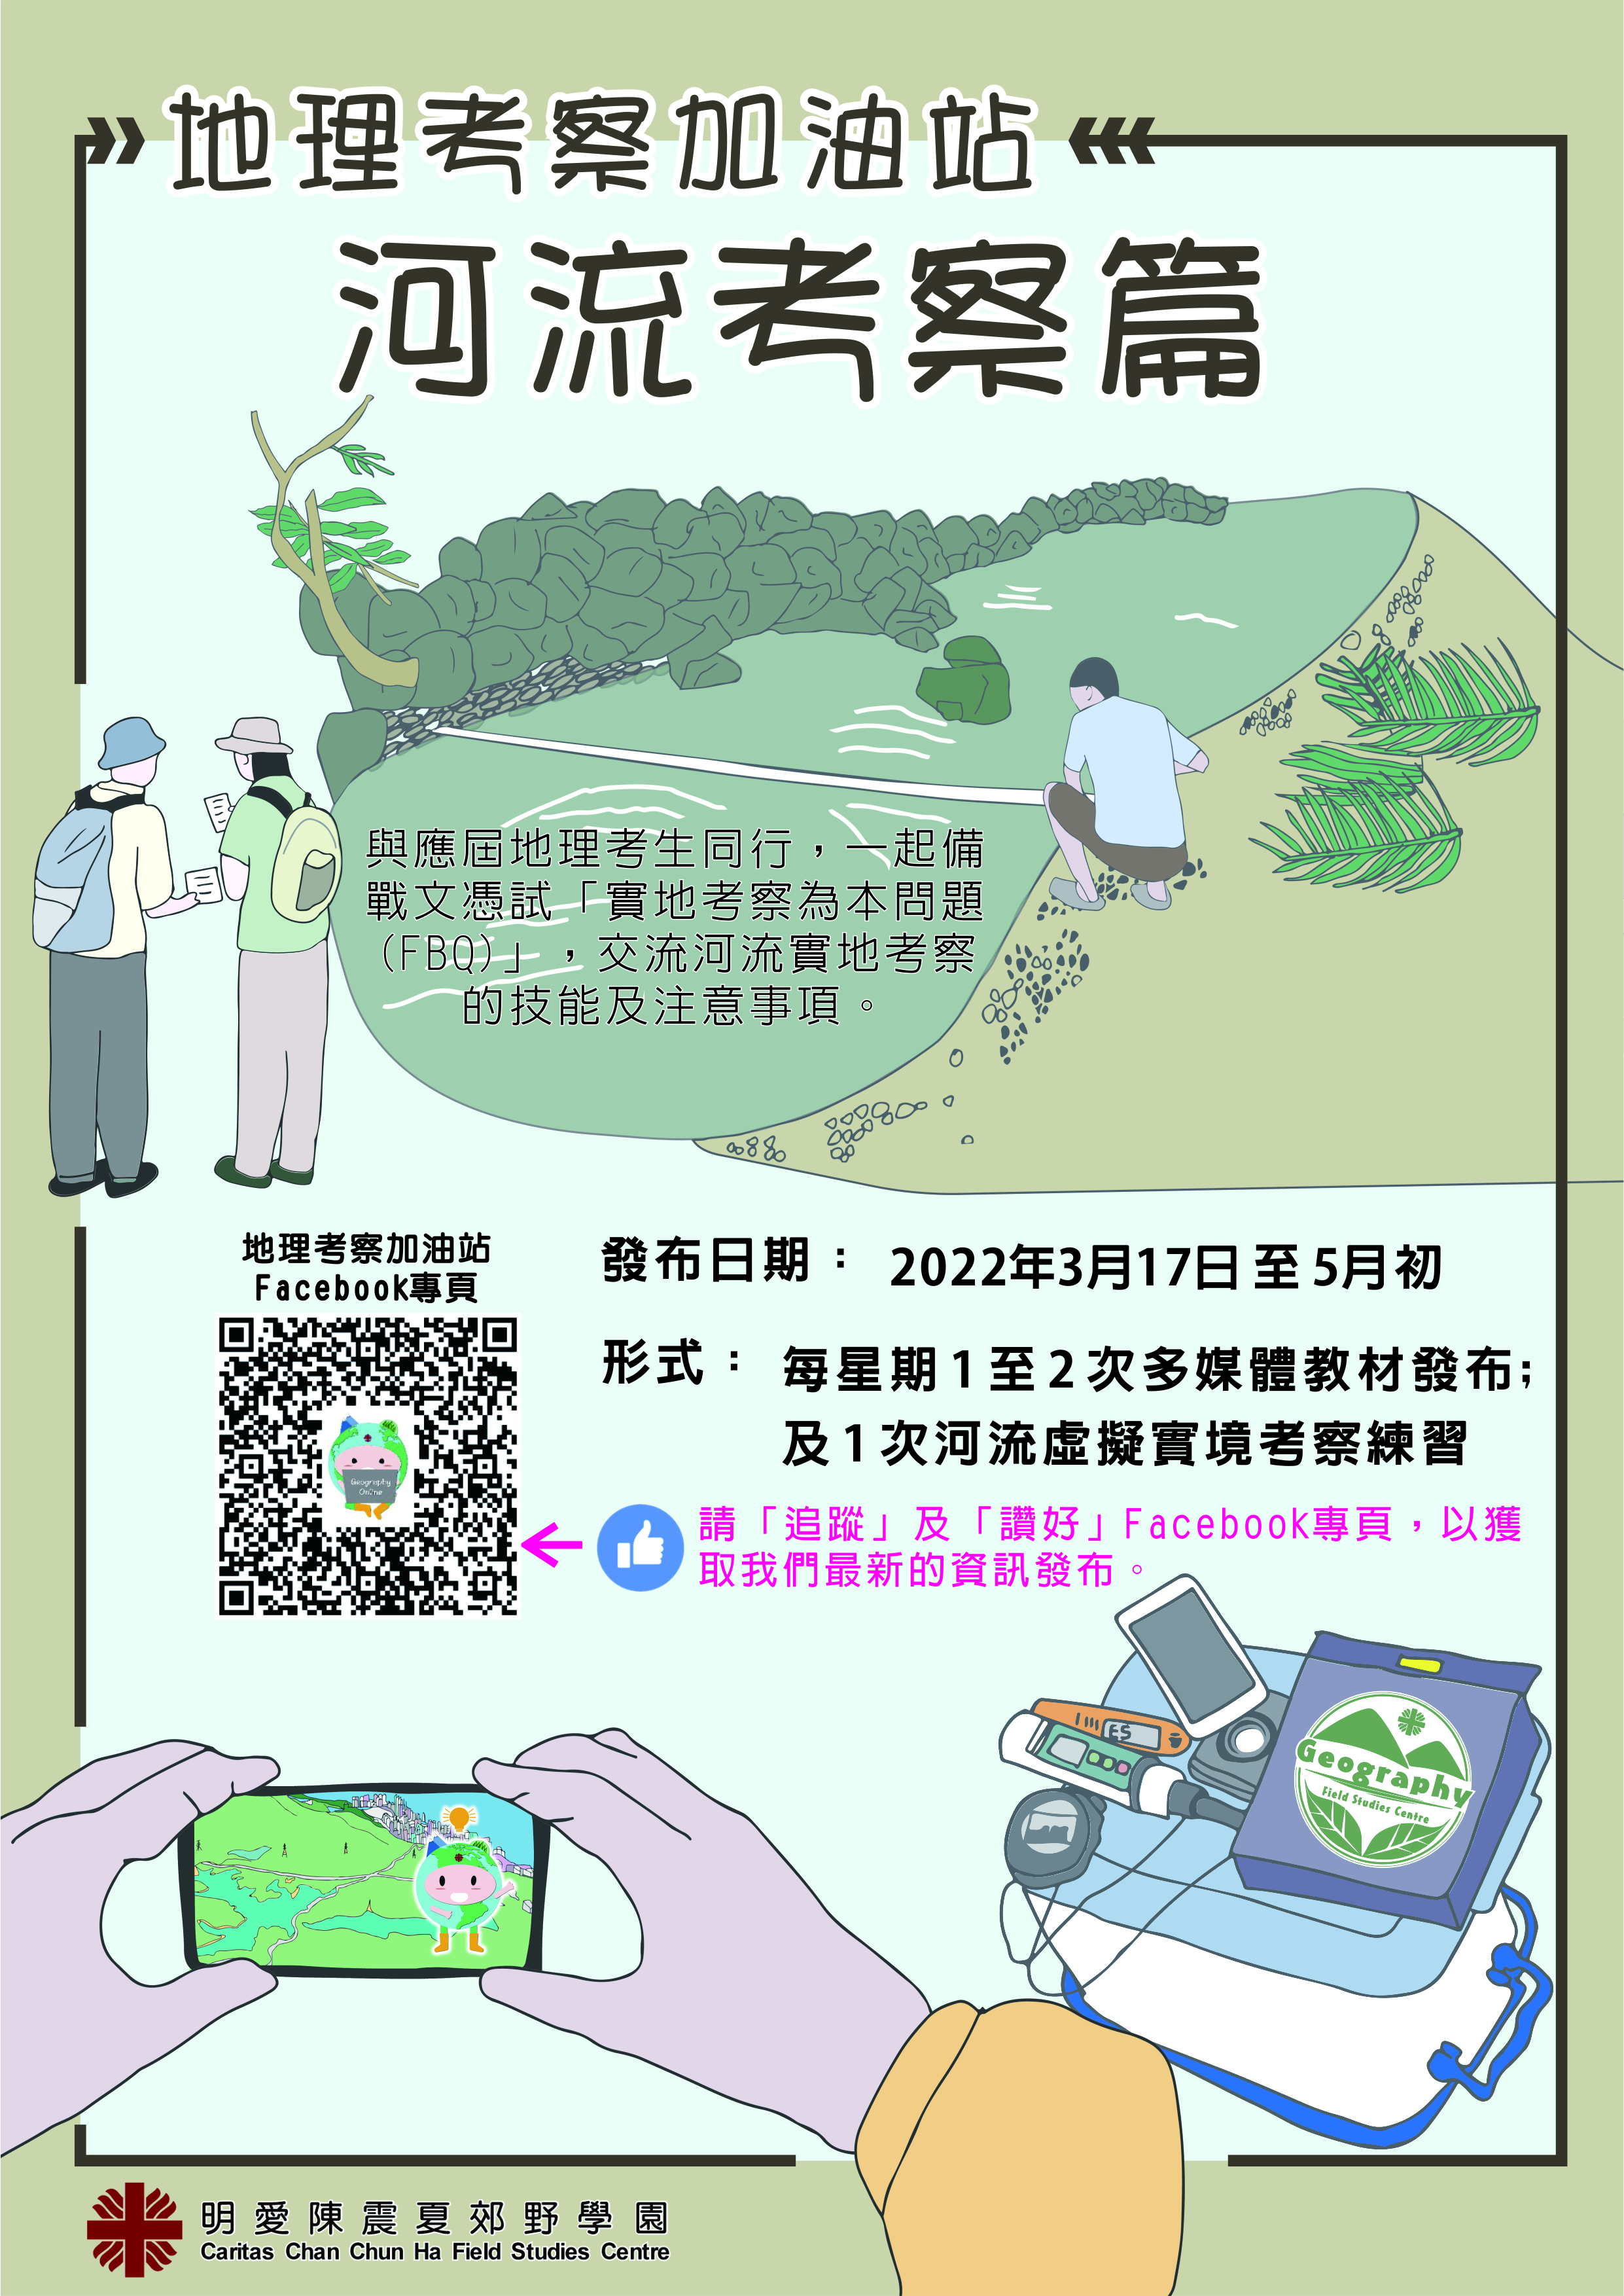 Geog Channel promotion--River (poster)